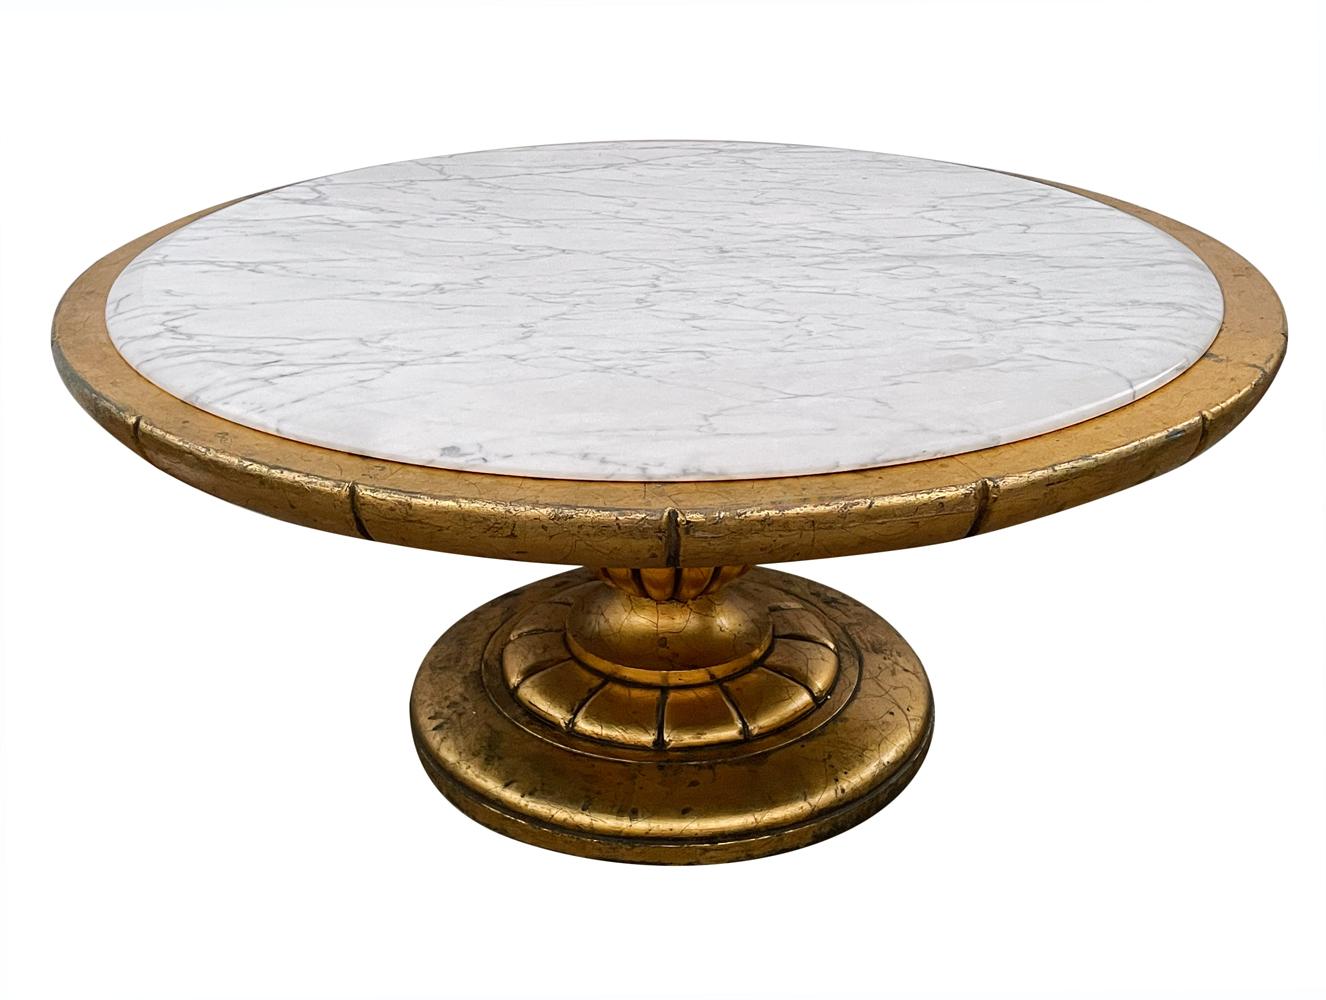 Late 20th Century Hollywood Regency Round Cocktail Table in Gold & Marble in Style of James Mont 